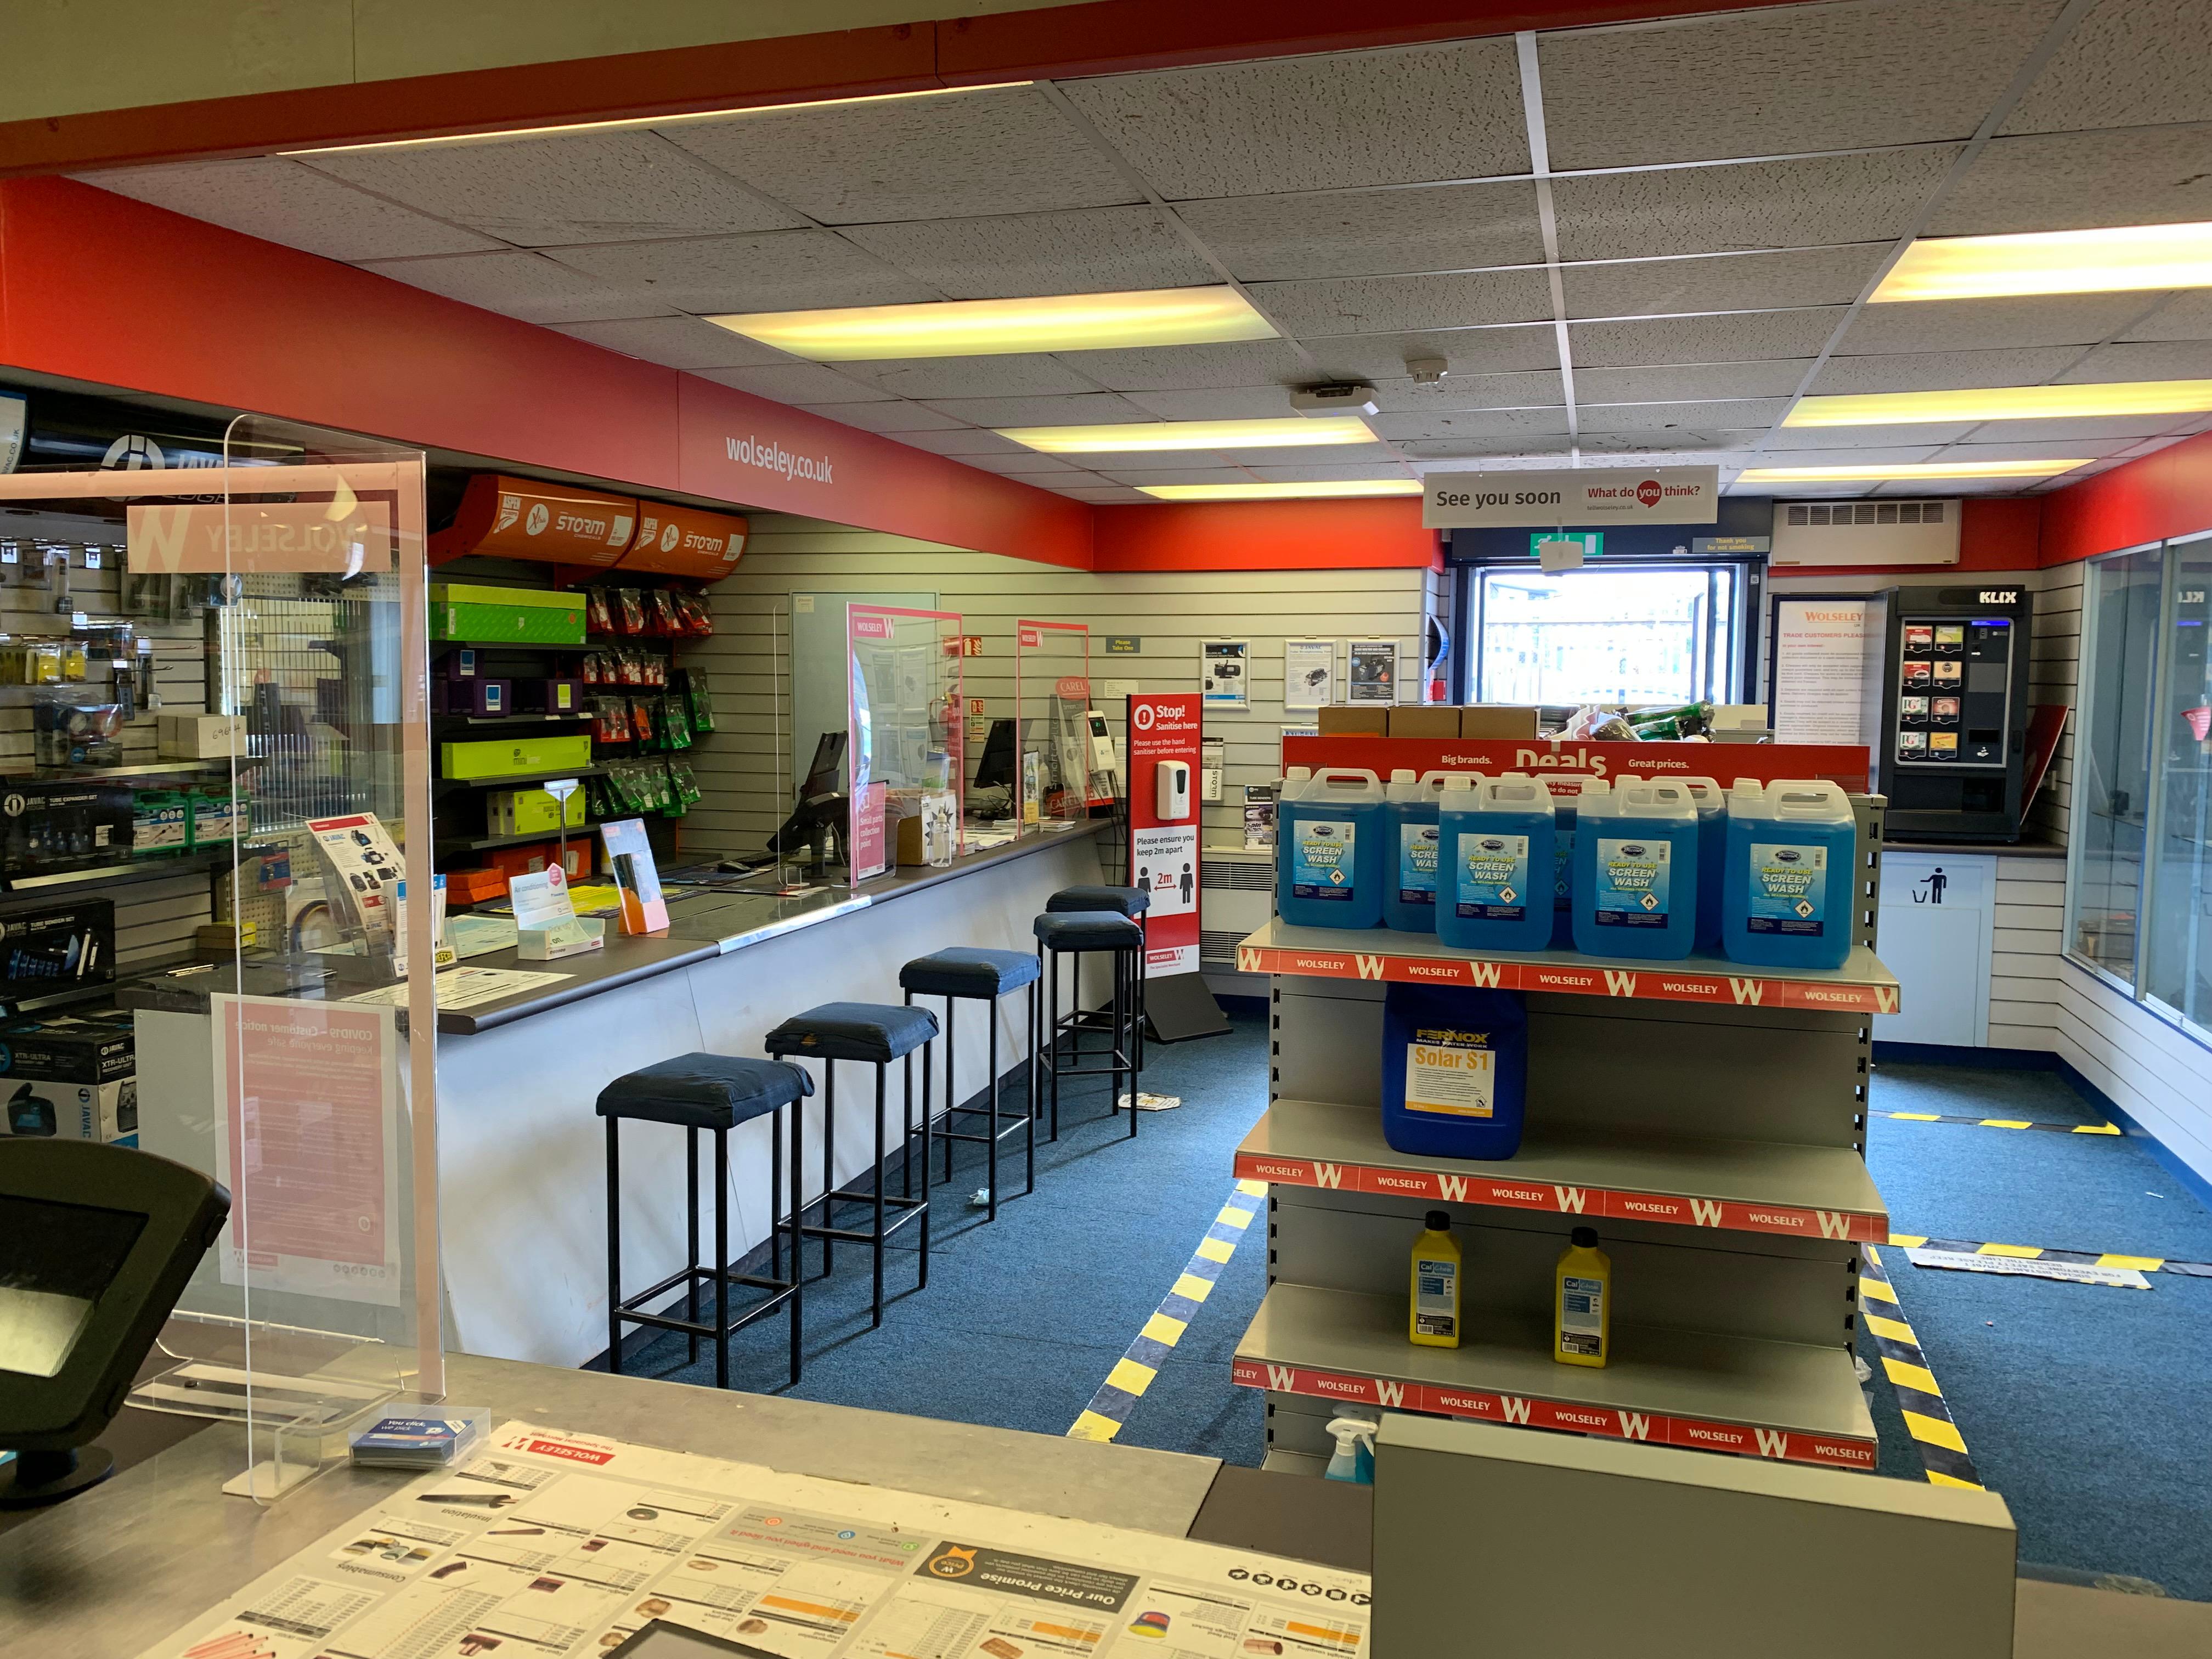 Image of the store